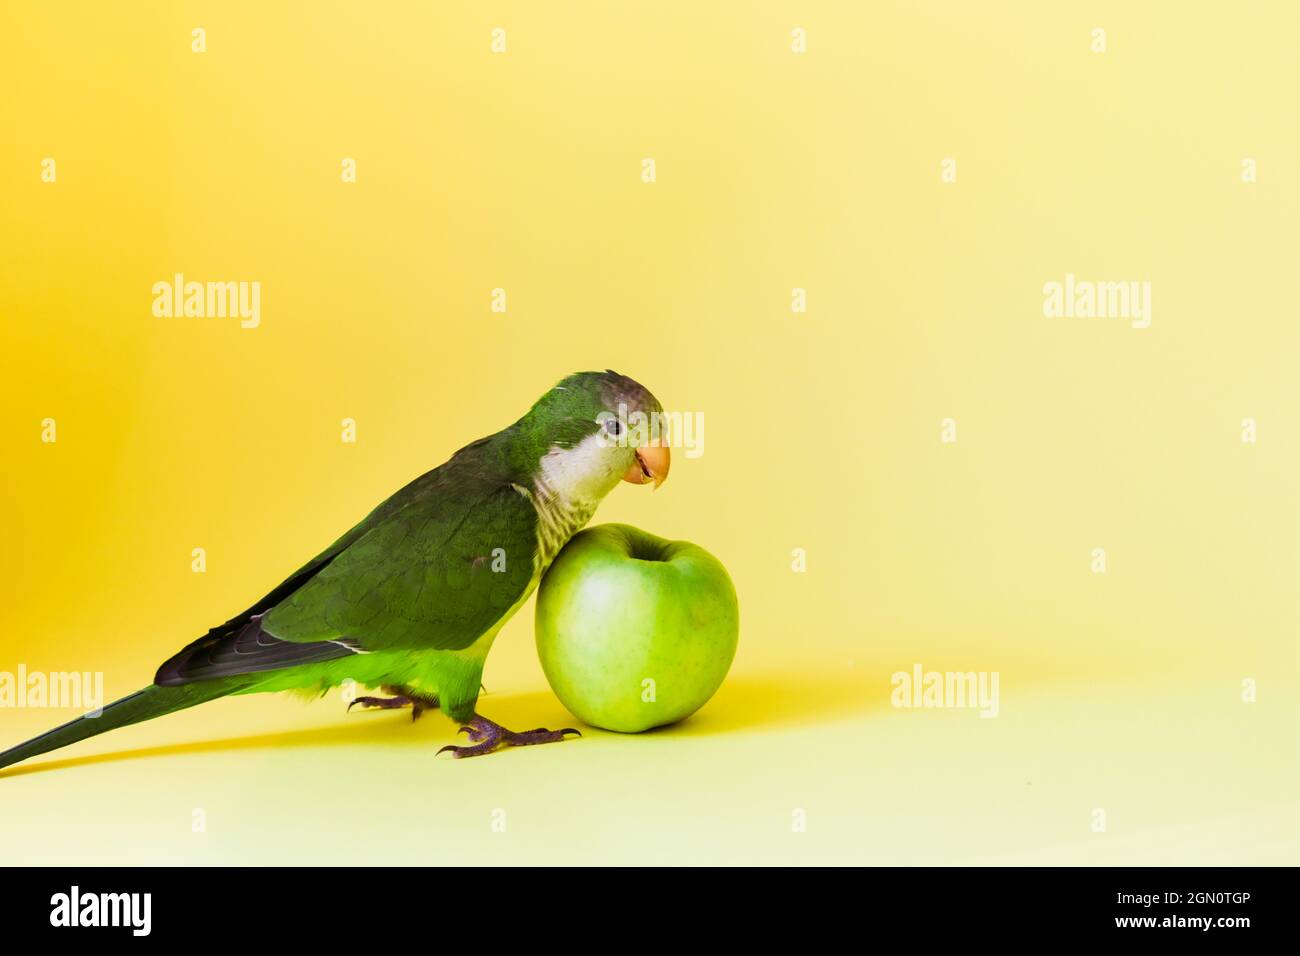 Green parrot monk breed with a round sharp beak eats a green healthy apple. Stock Photo